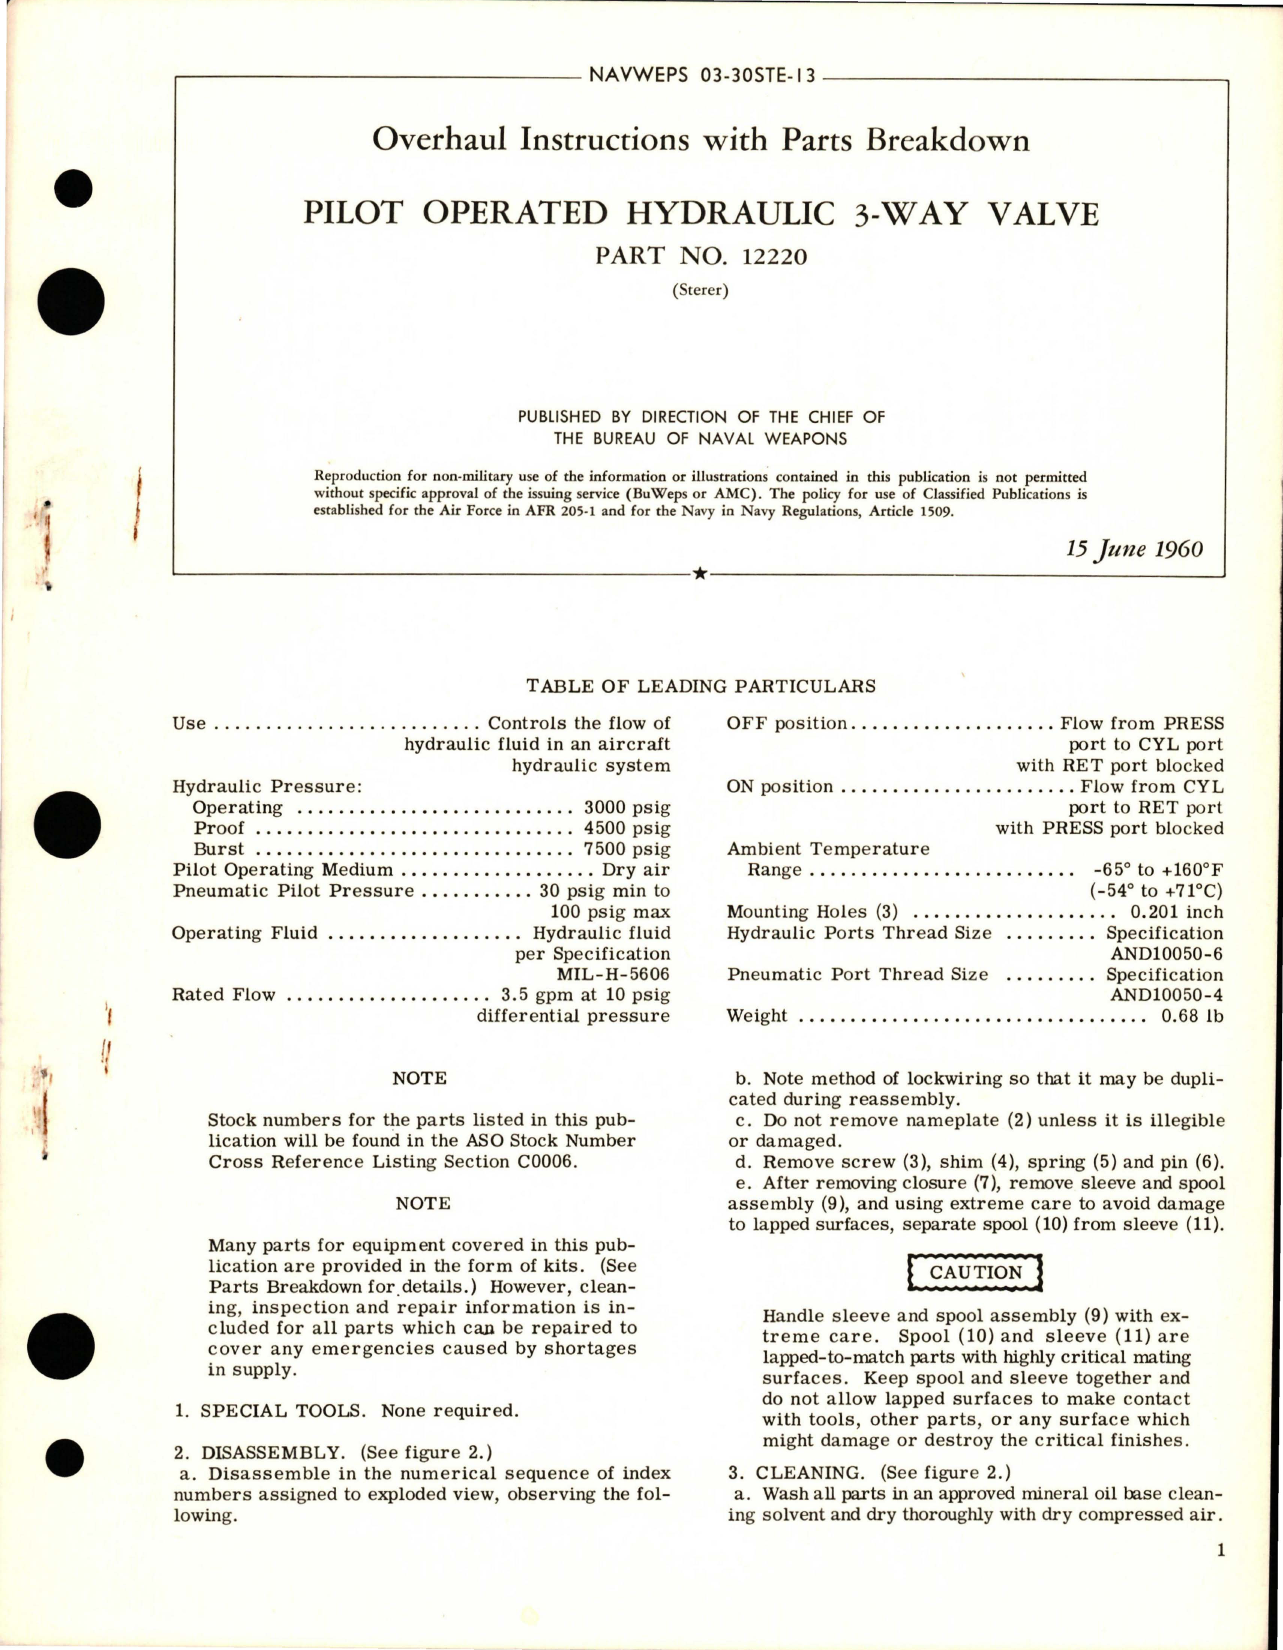 Sample page 1 from AirCorps Library document: Overhaul Instructions with Parts Breakdown for Pilot Operated Hydraulic 3-Way Valve - Part 12220